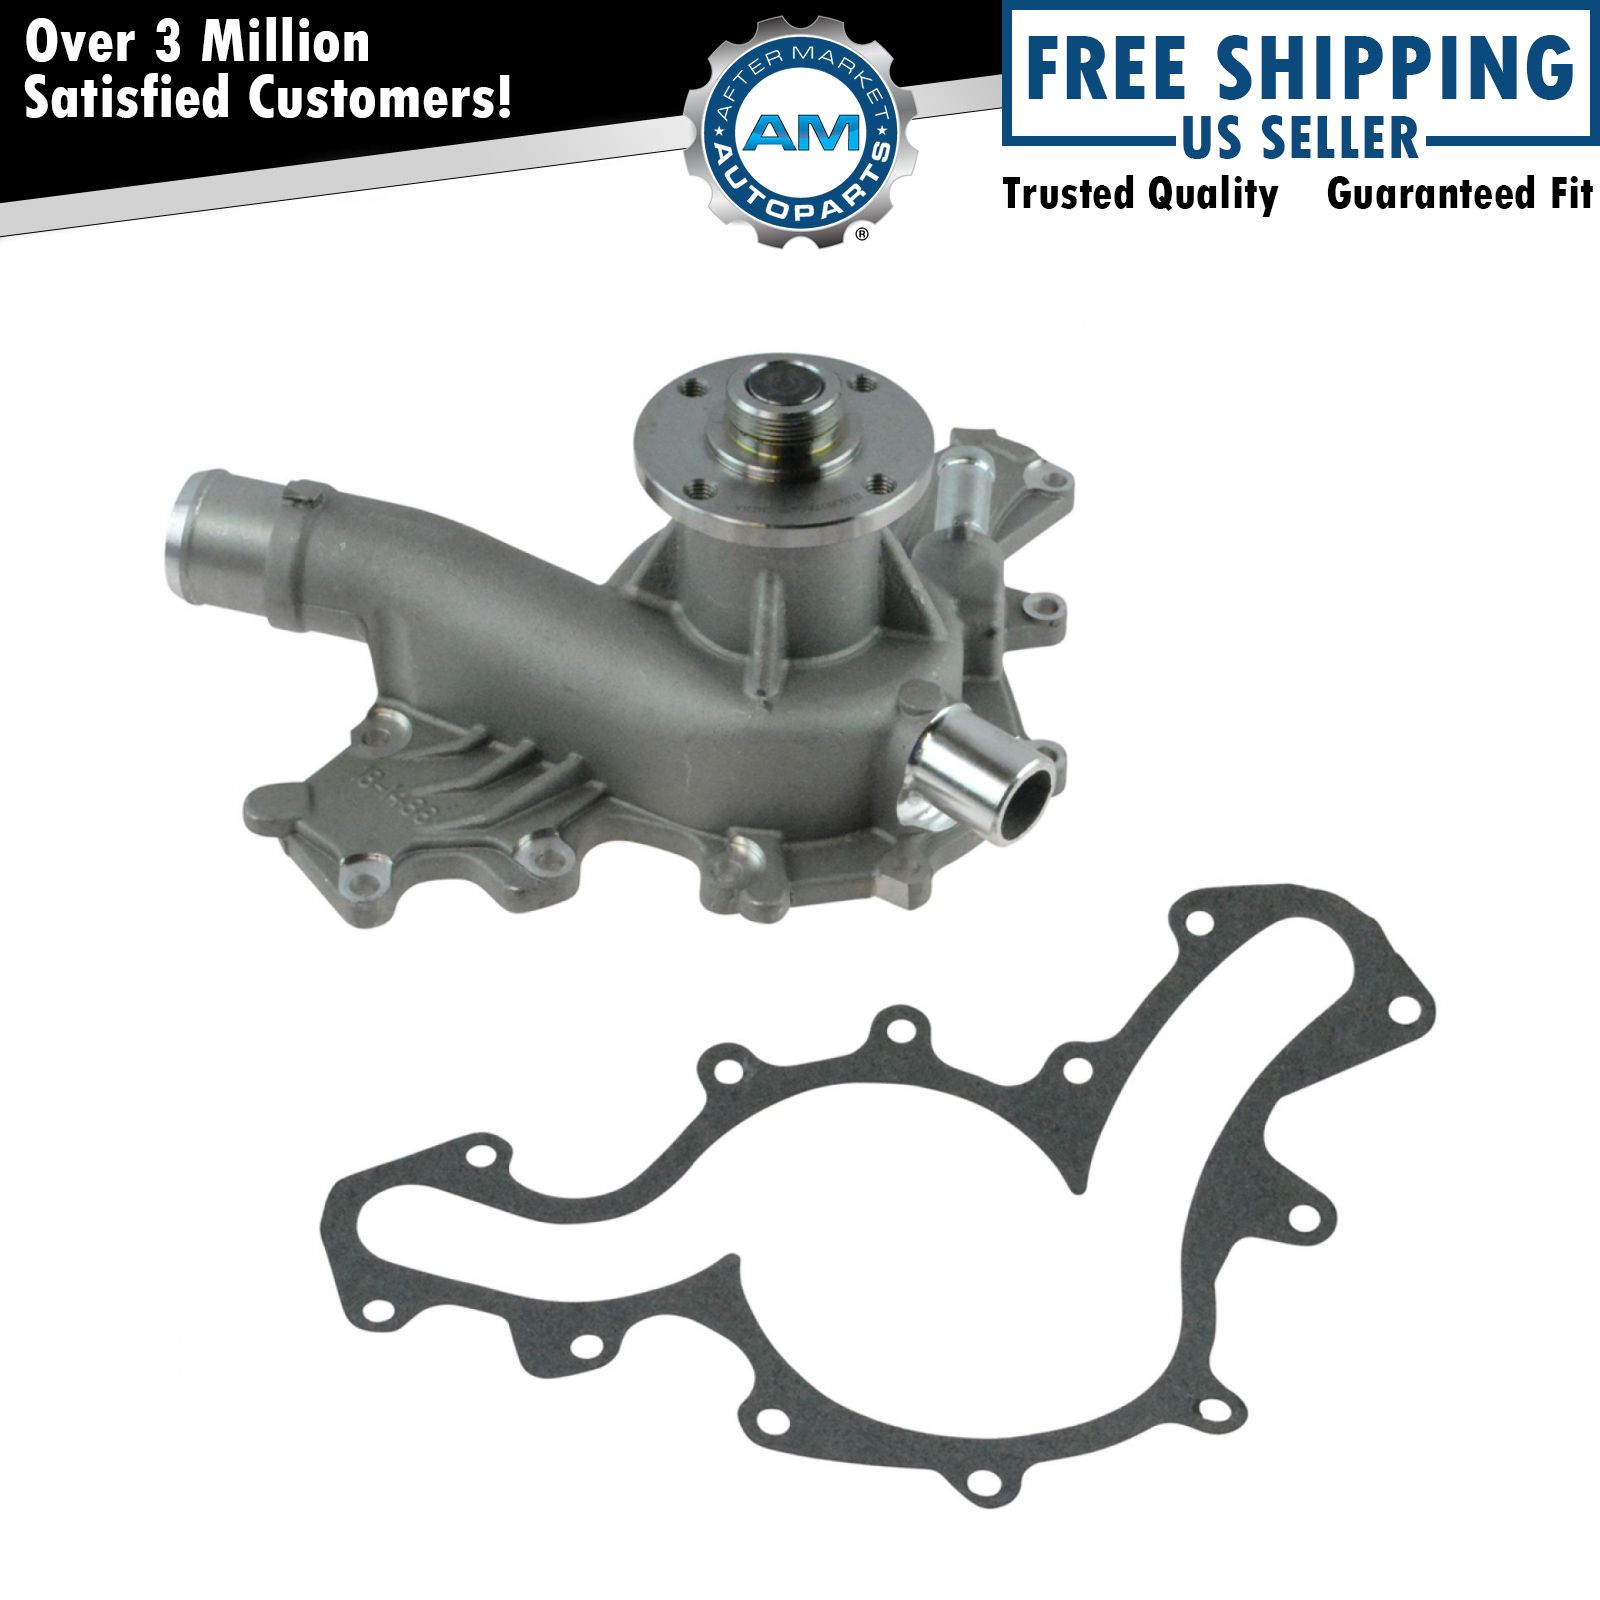 AC Delco Professional Series 252-544 Engine Water Pump for Ford Mercury New